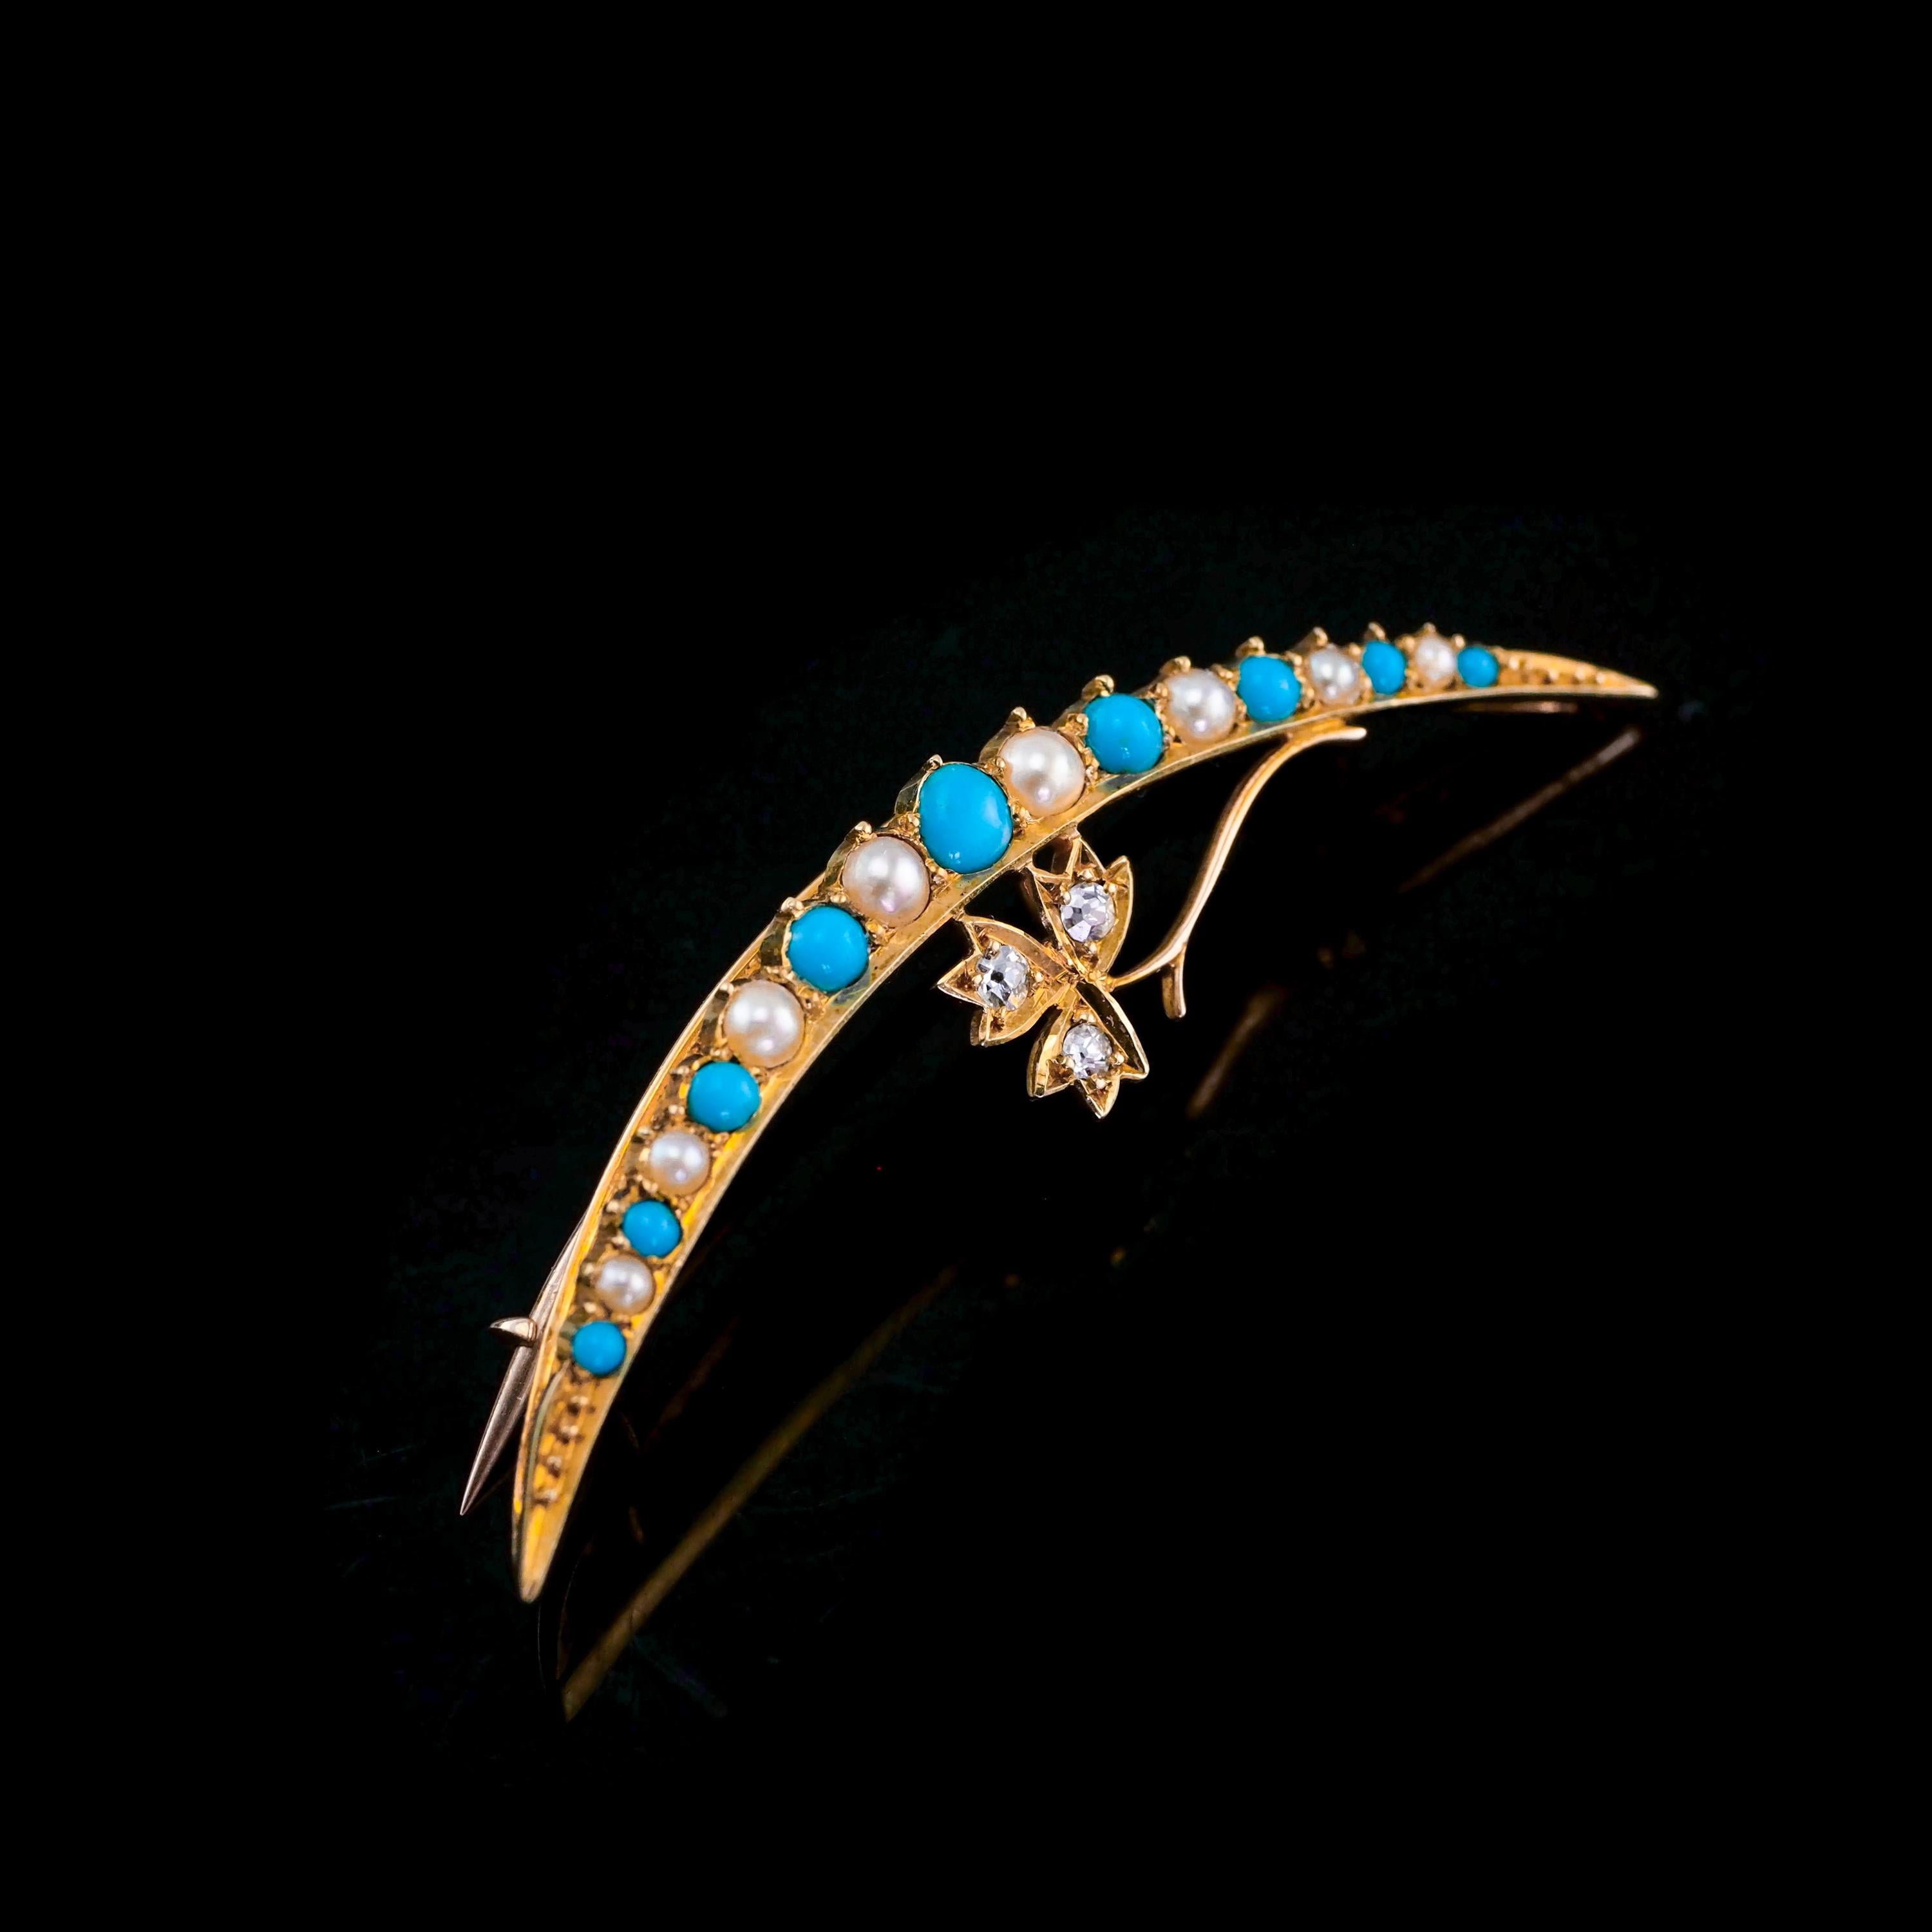 Antique Victorian 15k Gold Turquoise, Pearl & Diamond Crescent Brooch, c.1900 For Sale 10